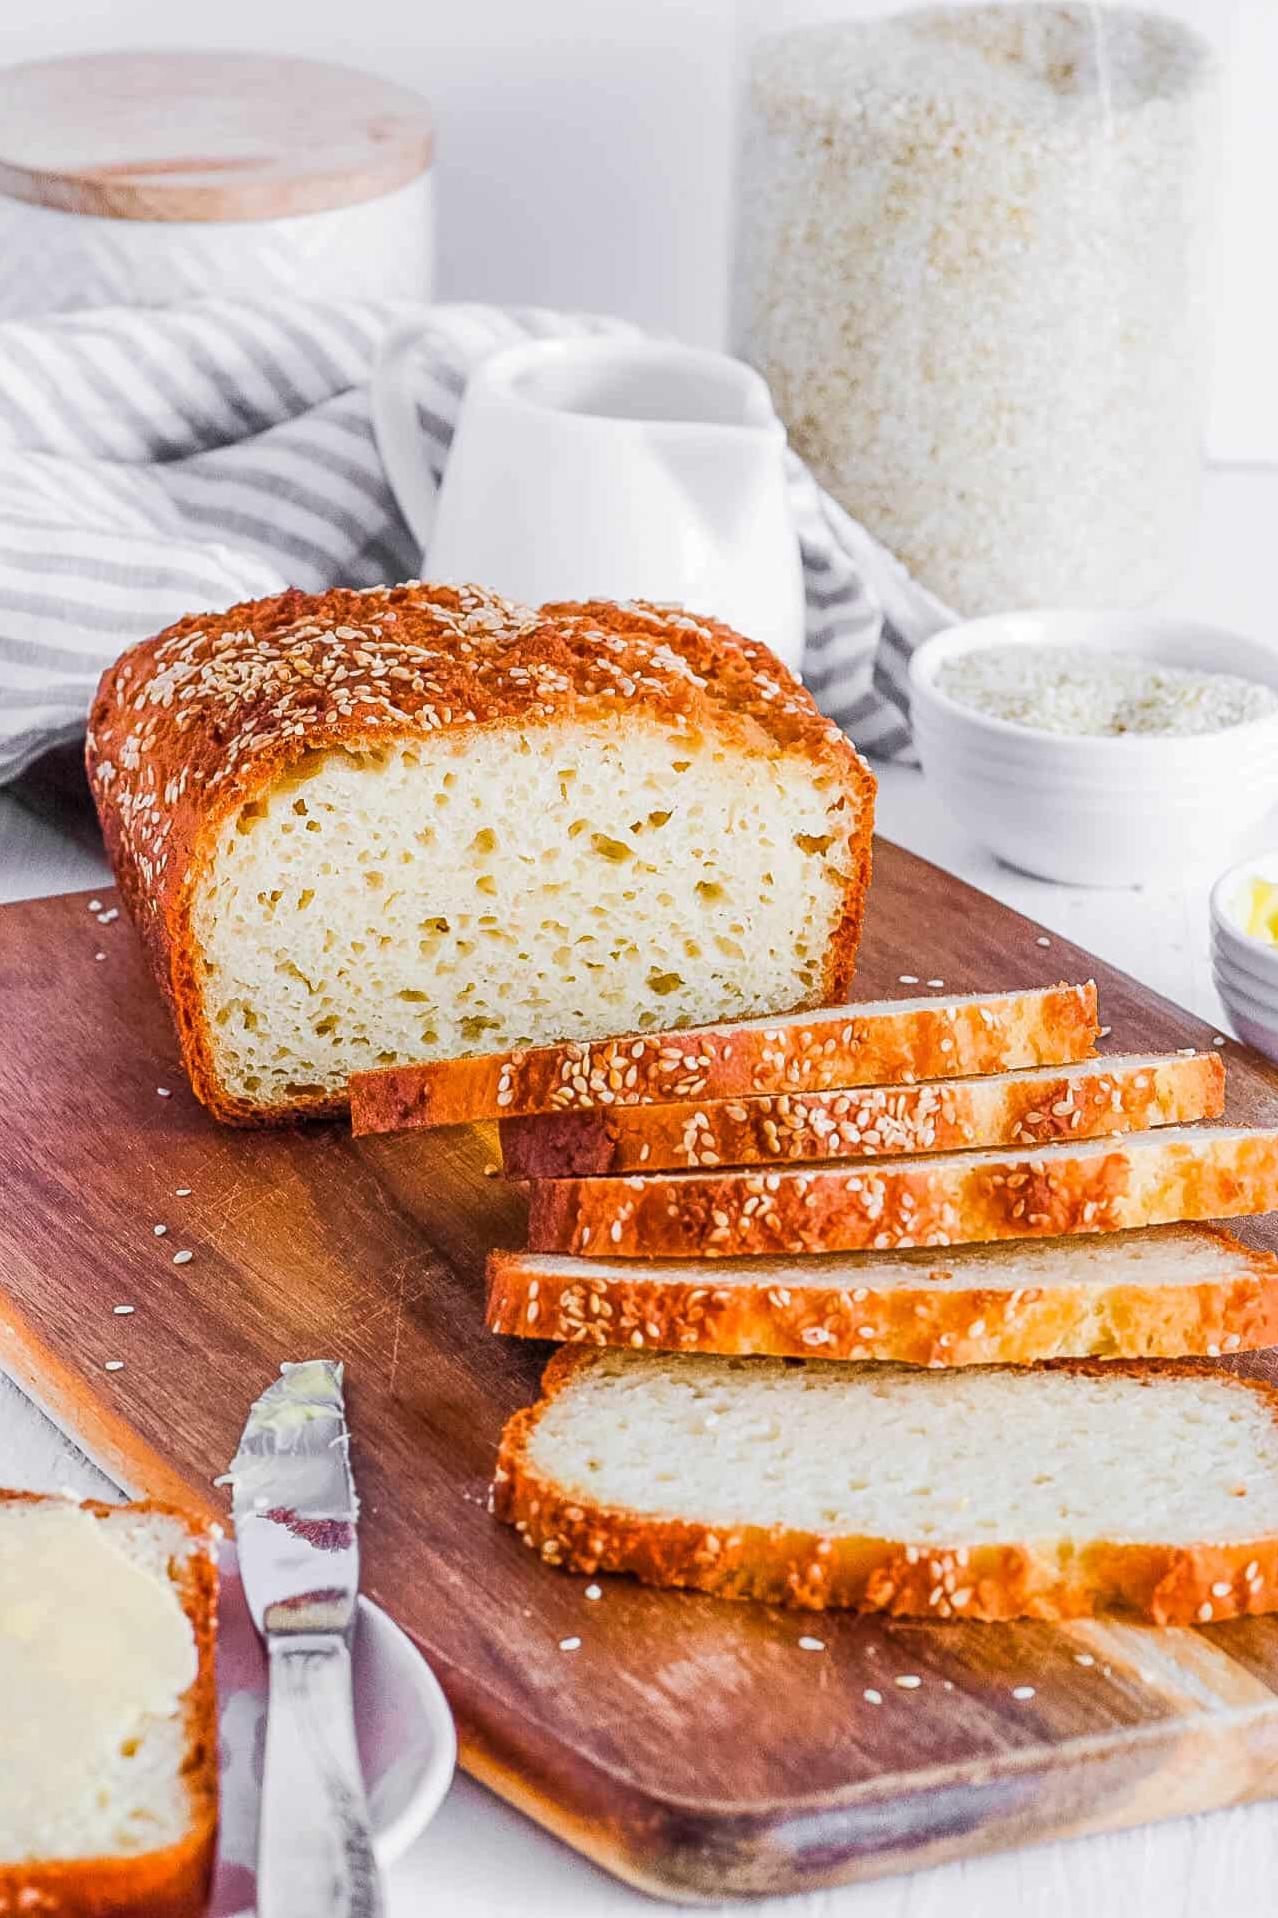  The soft and airy texture of this gluten-free bread is irresistible